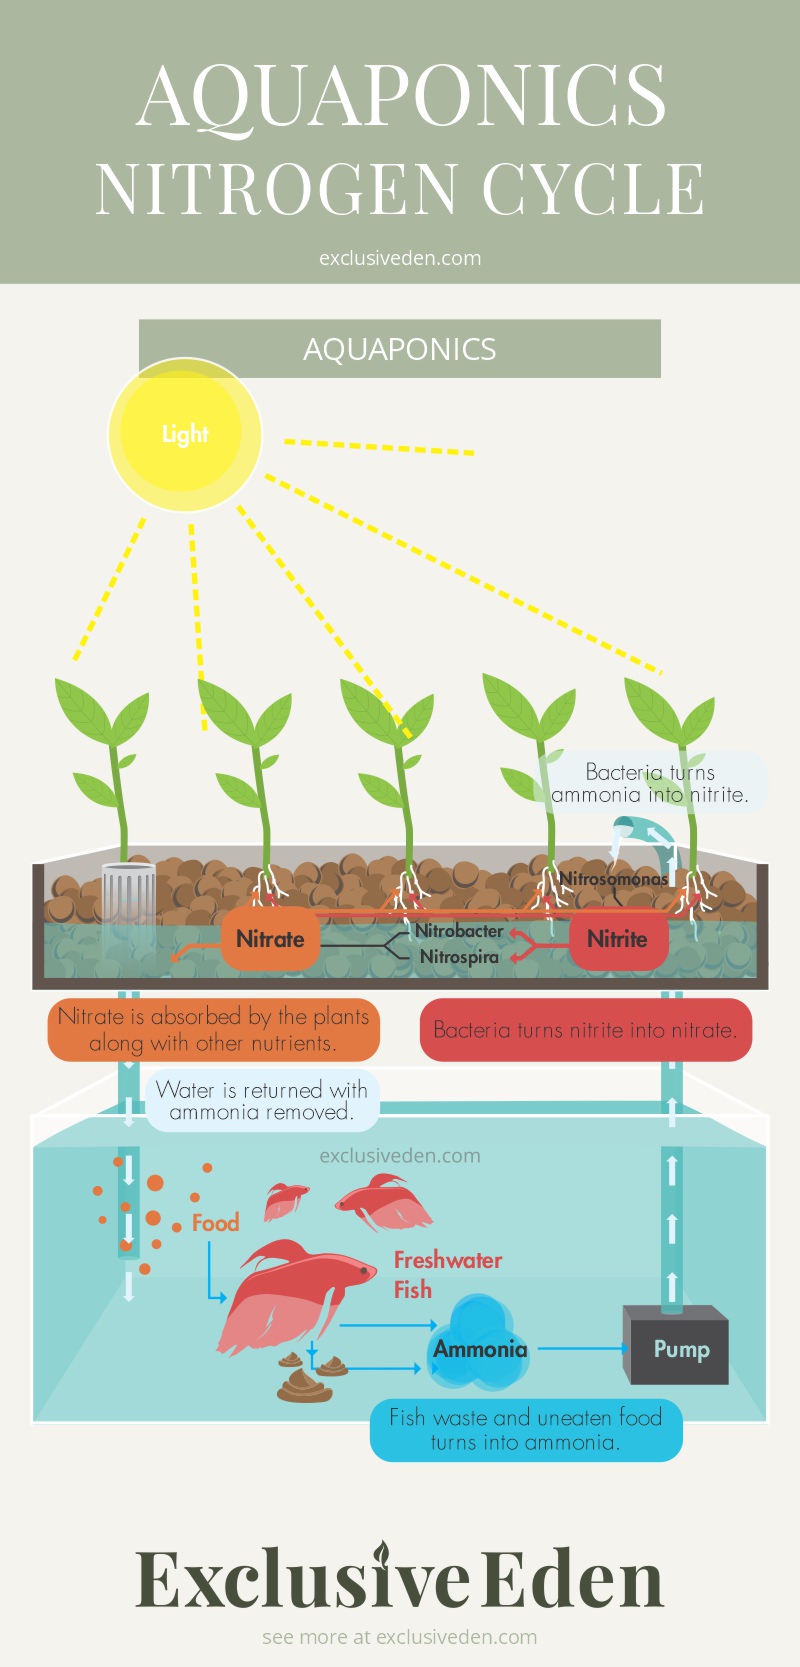 Illustrated infographic that described the aquaponics nitrogen cycle.